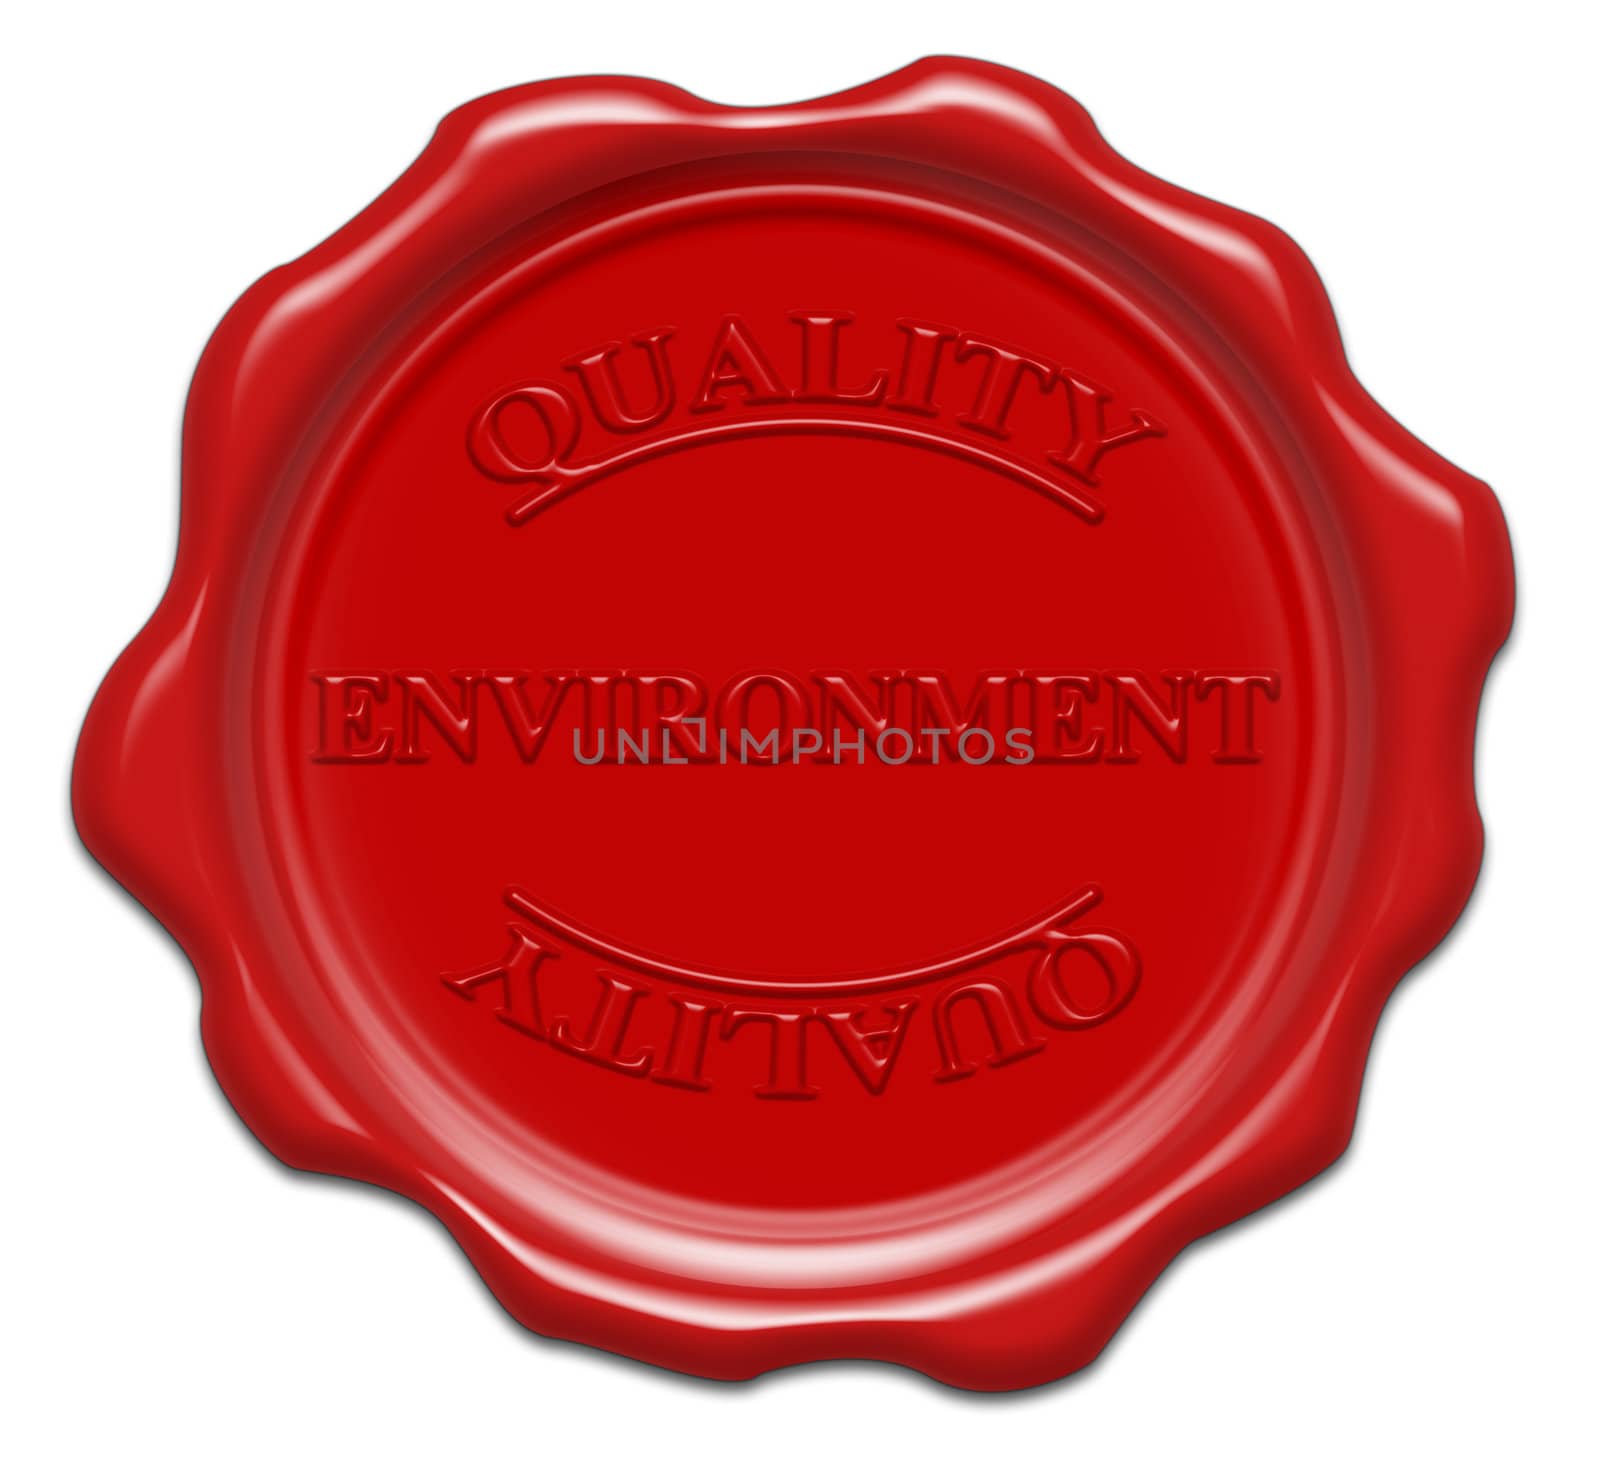 environment quality - illustration red wax seal isolated on whit by mozzyb